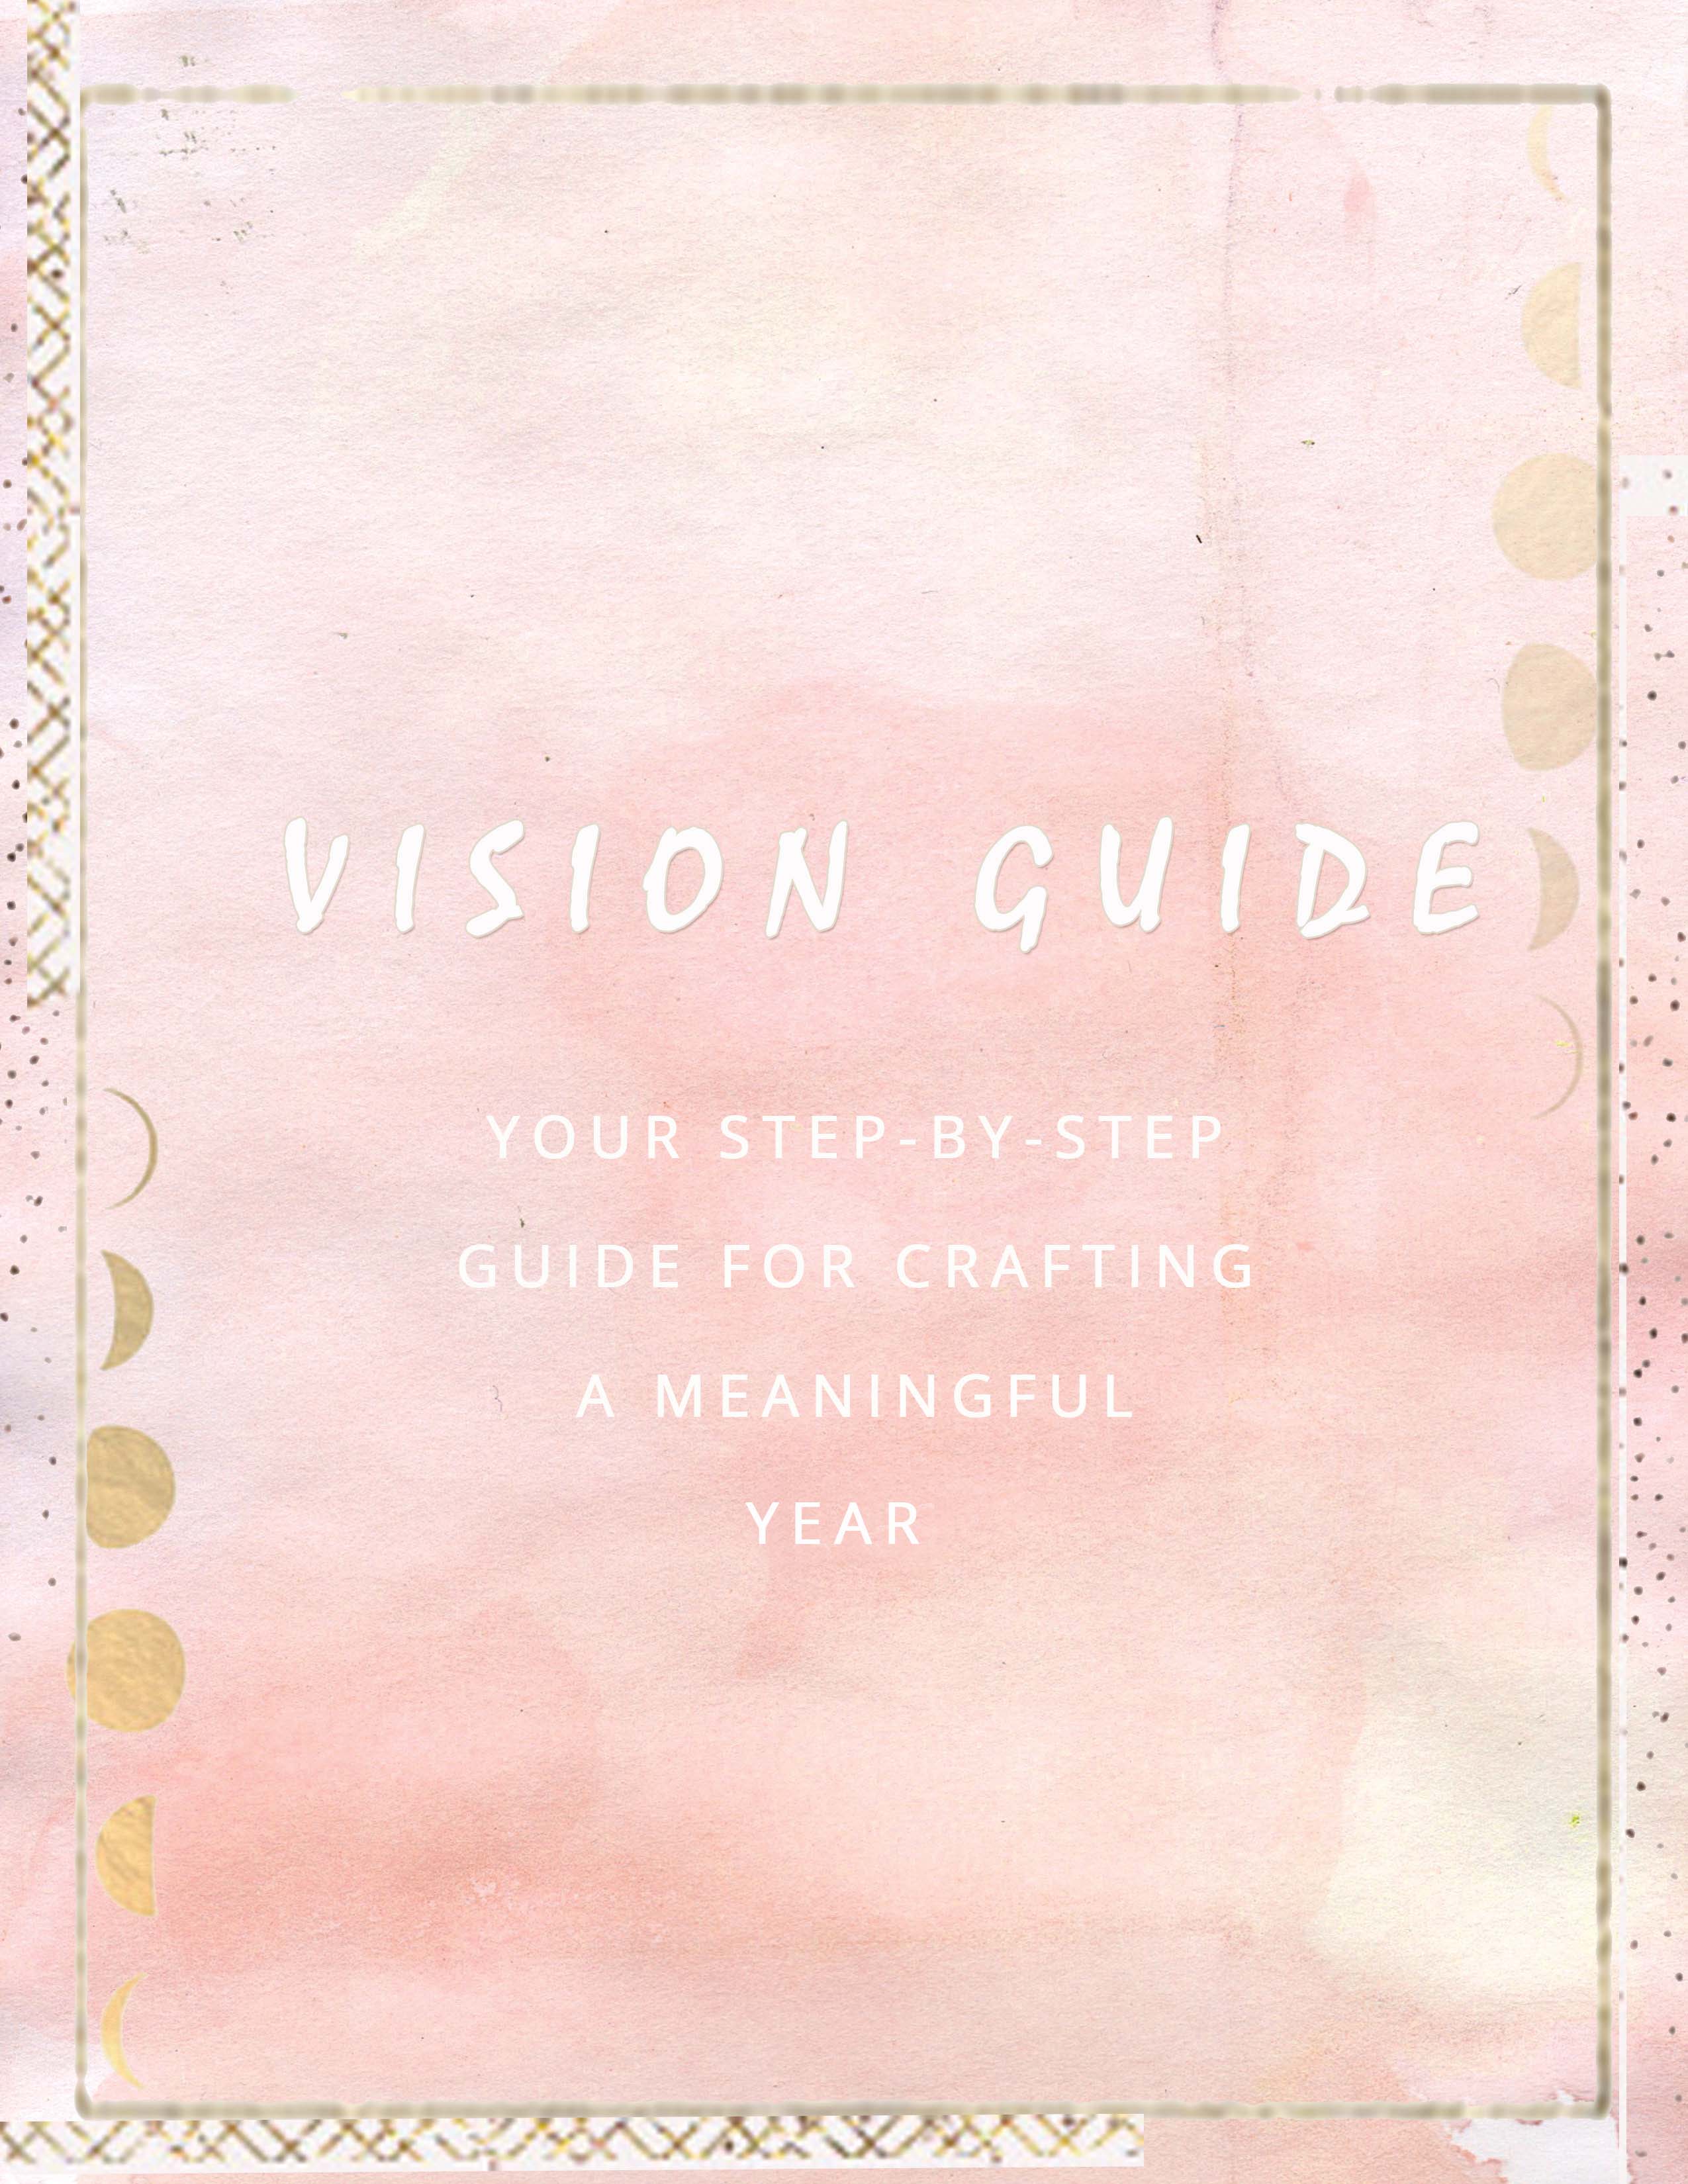 visionguide-2018